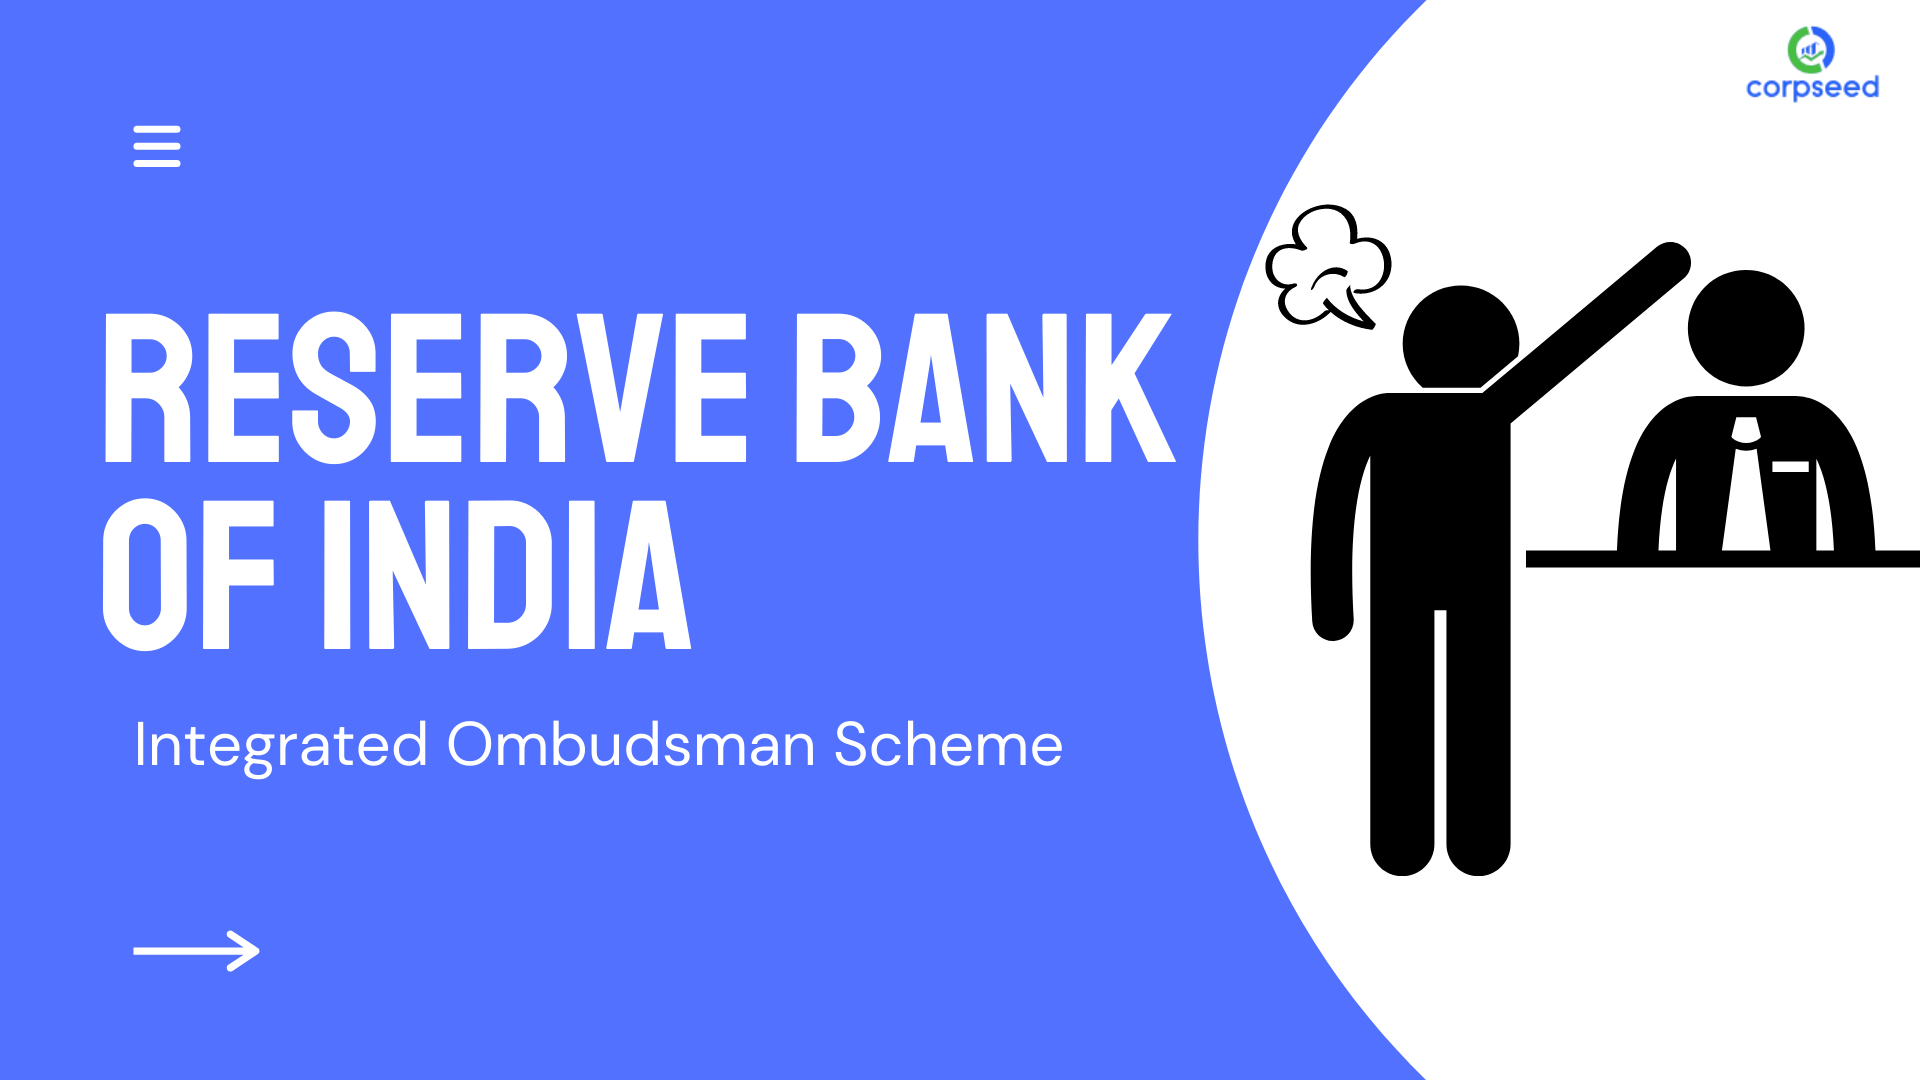 reserve-bank-of-india-integrated-ombudsman-scheme-corpseed.png